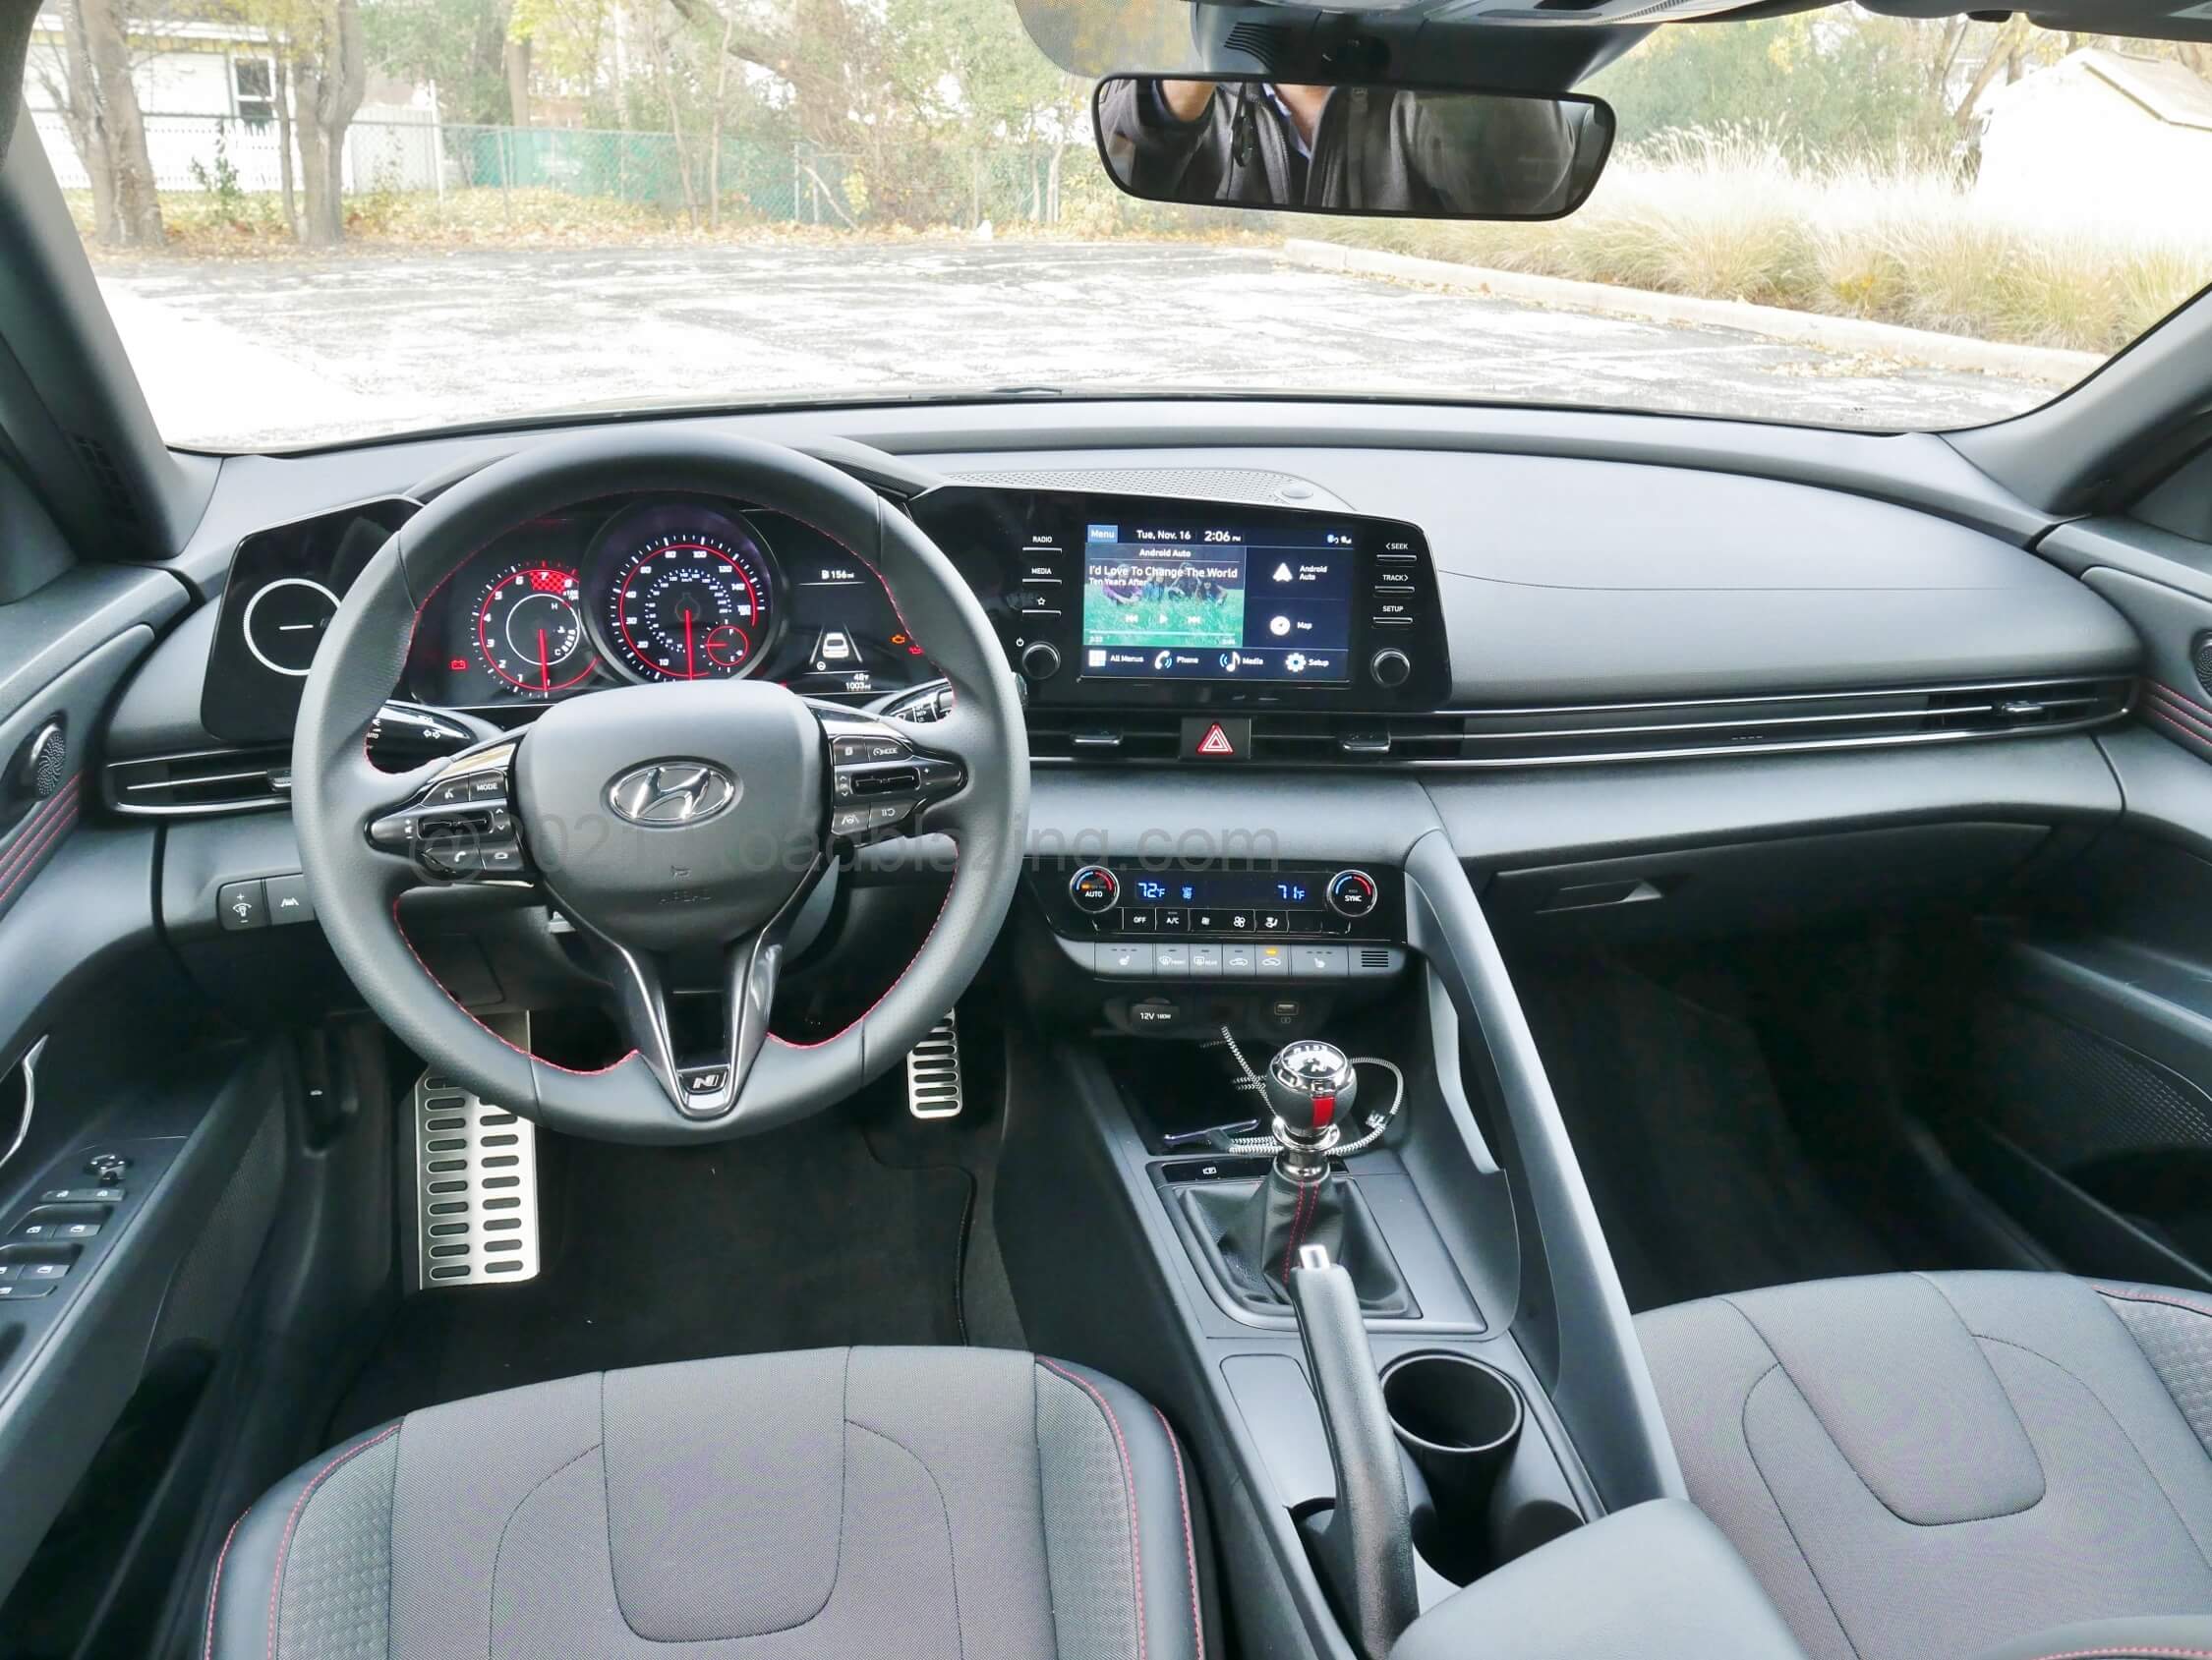 2021 Hyundai Elantra N-Line 1.6T: all business cockpit business attire cockpit with rakish lines and cohesive informative displays and controls